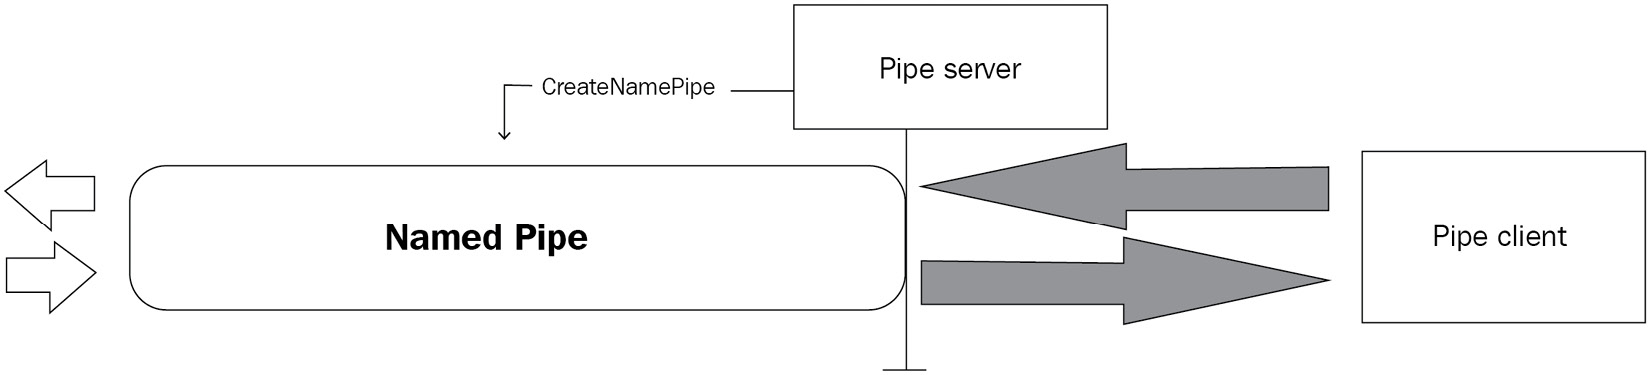 Figure 16.1 – Visual depiction of named pipes
